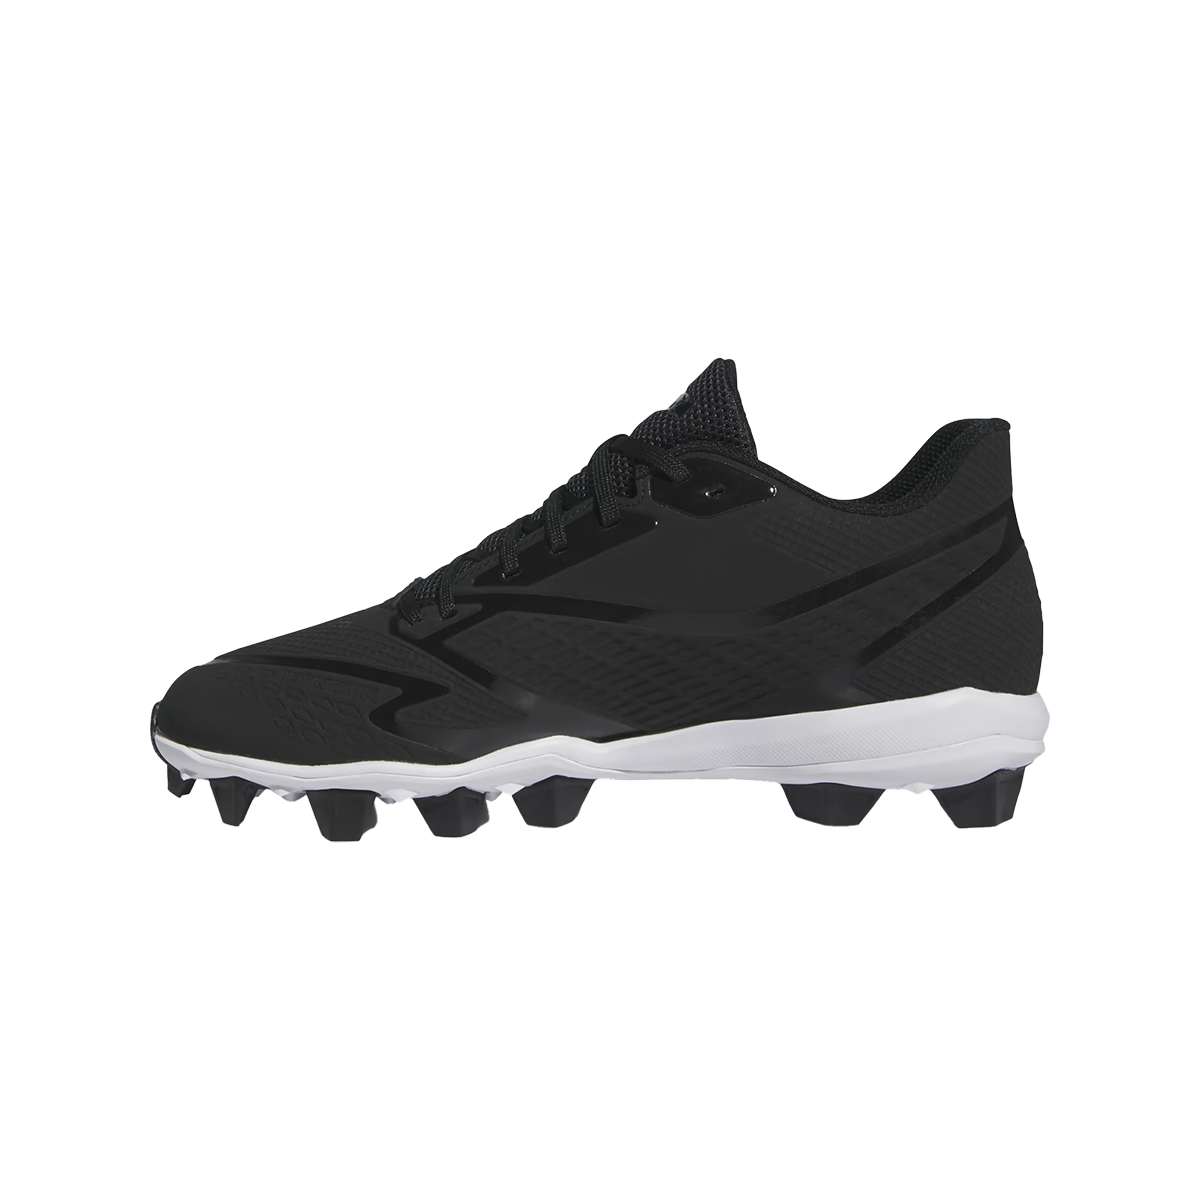 Men's Icon 8 MD Cleats alternate view